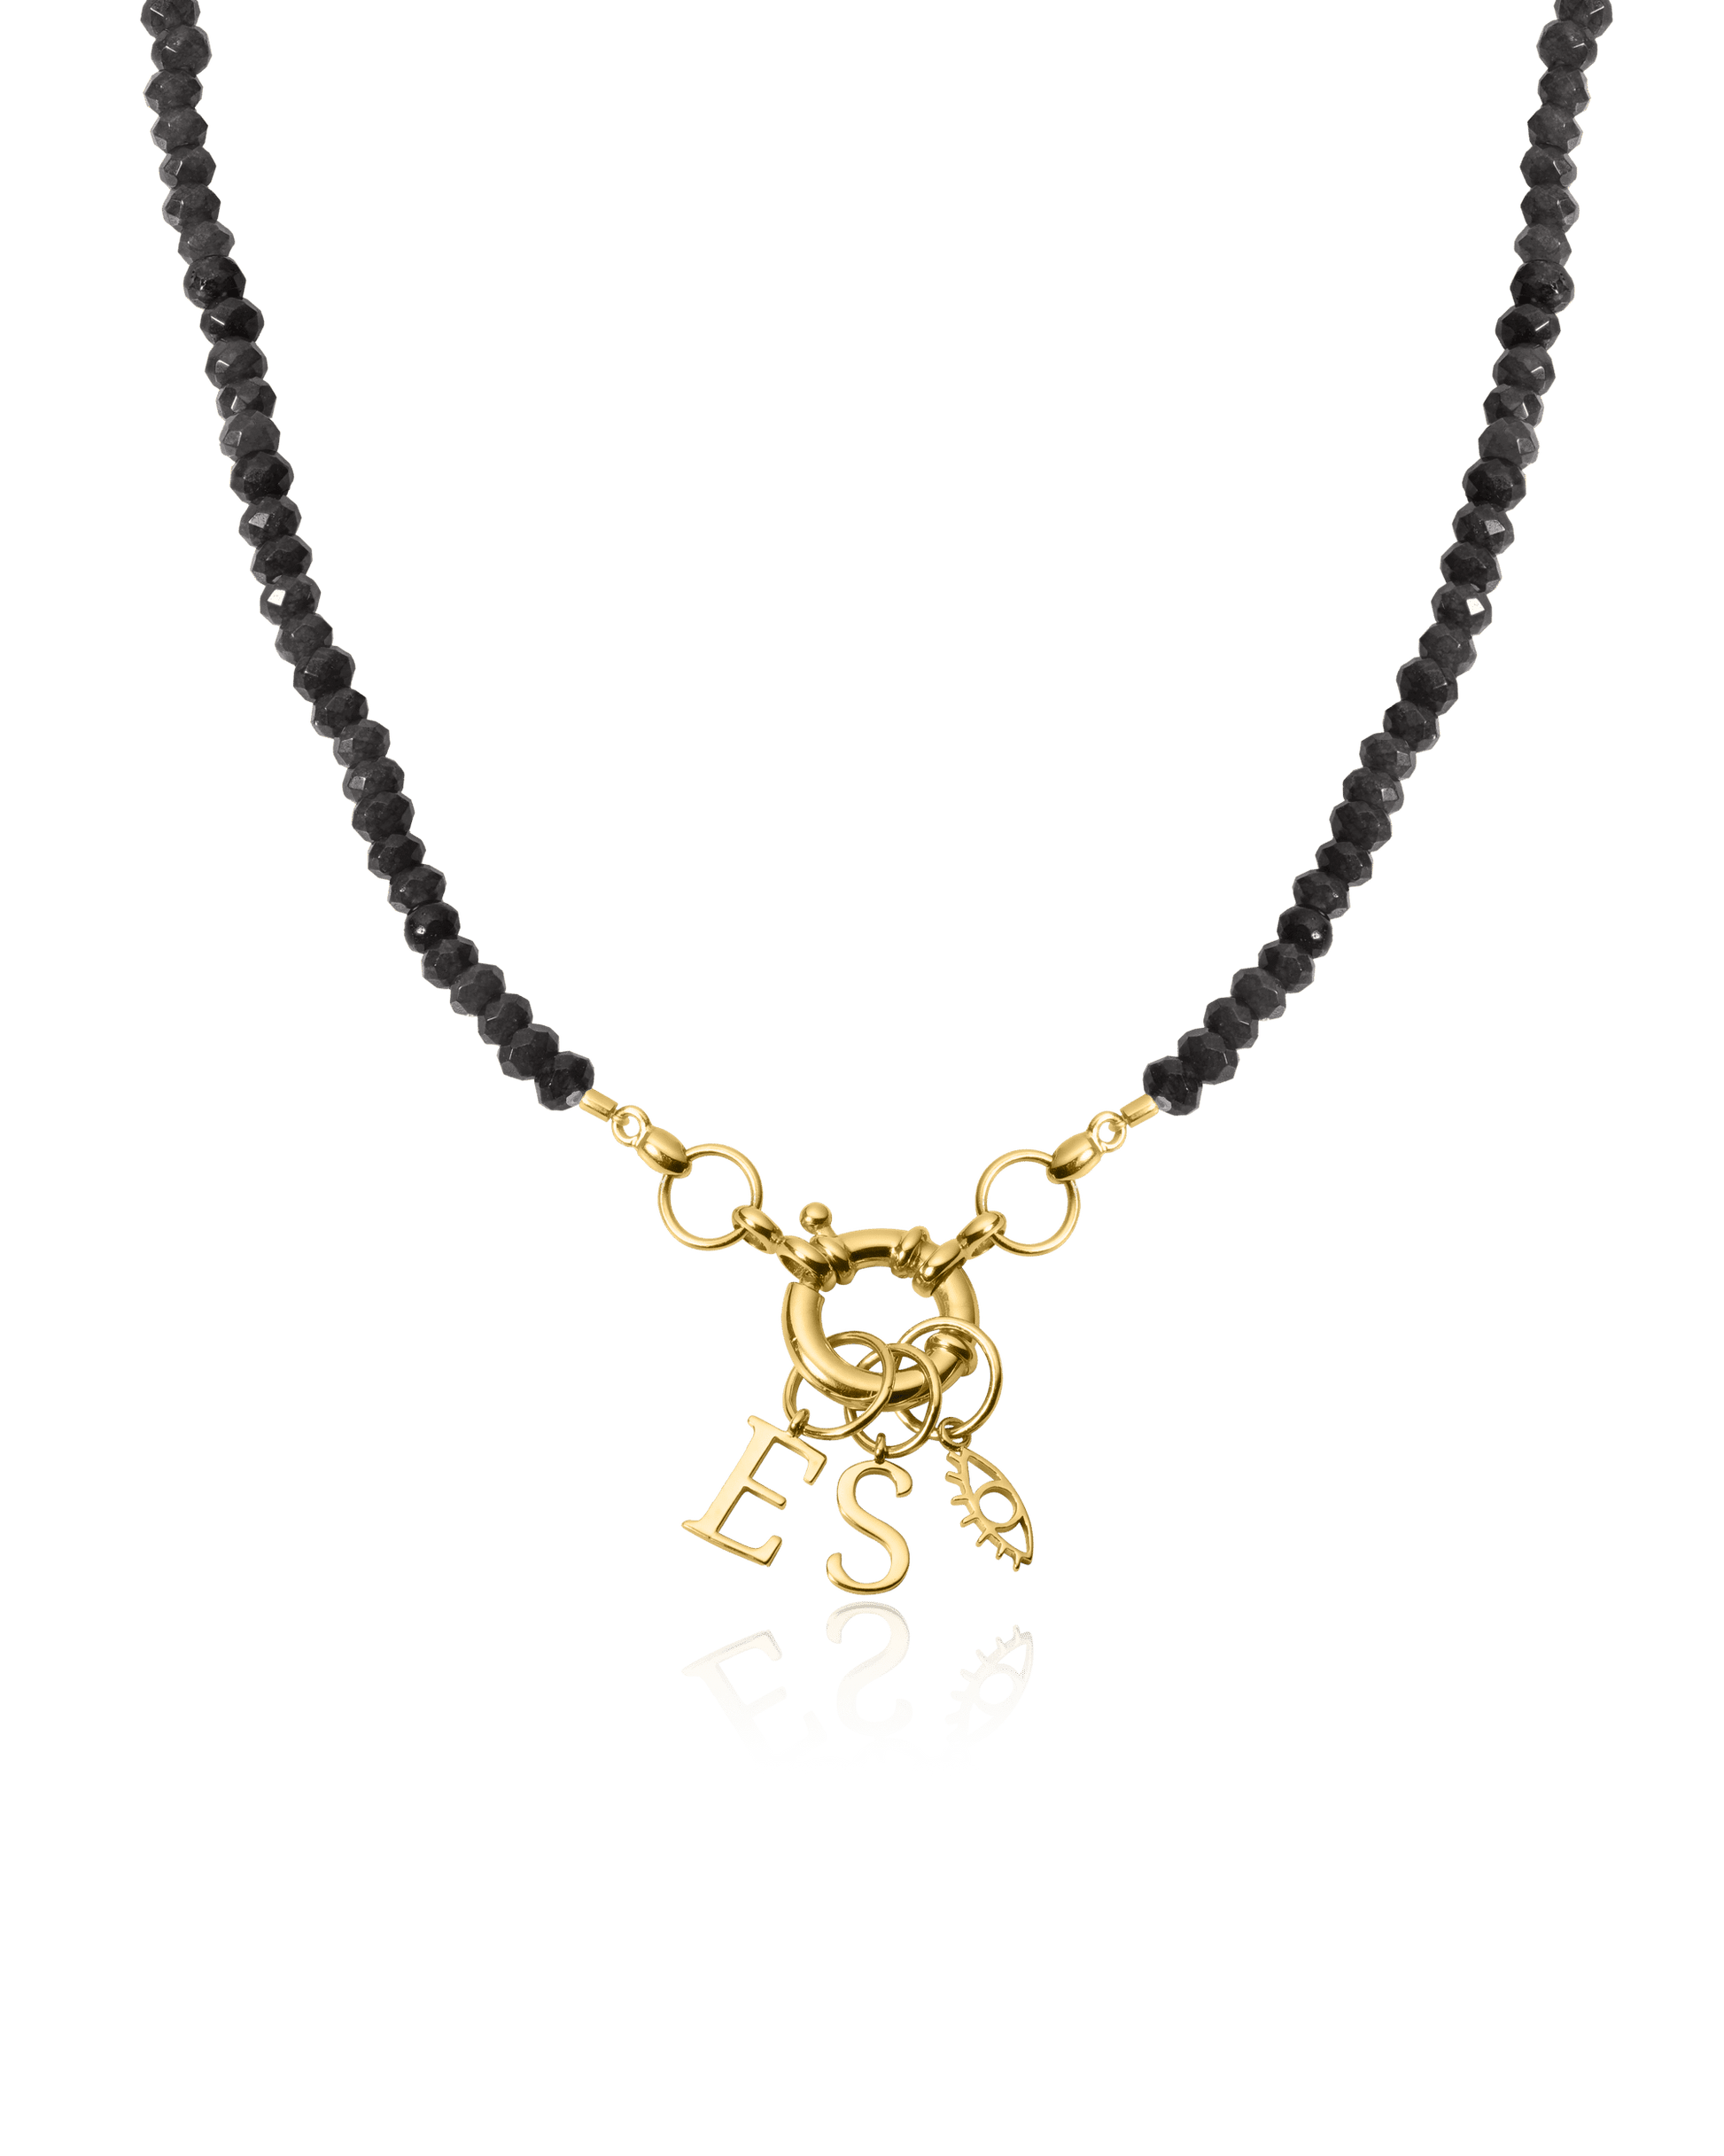 Black Spinnel Charm Lock Necklace - 18K Gold Vermeil Necklaces magal-dev Glass Beads Black Spinnel 1 Charm 16"